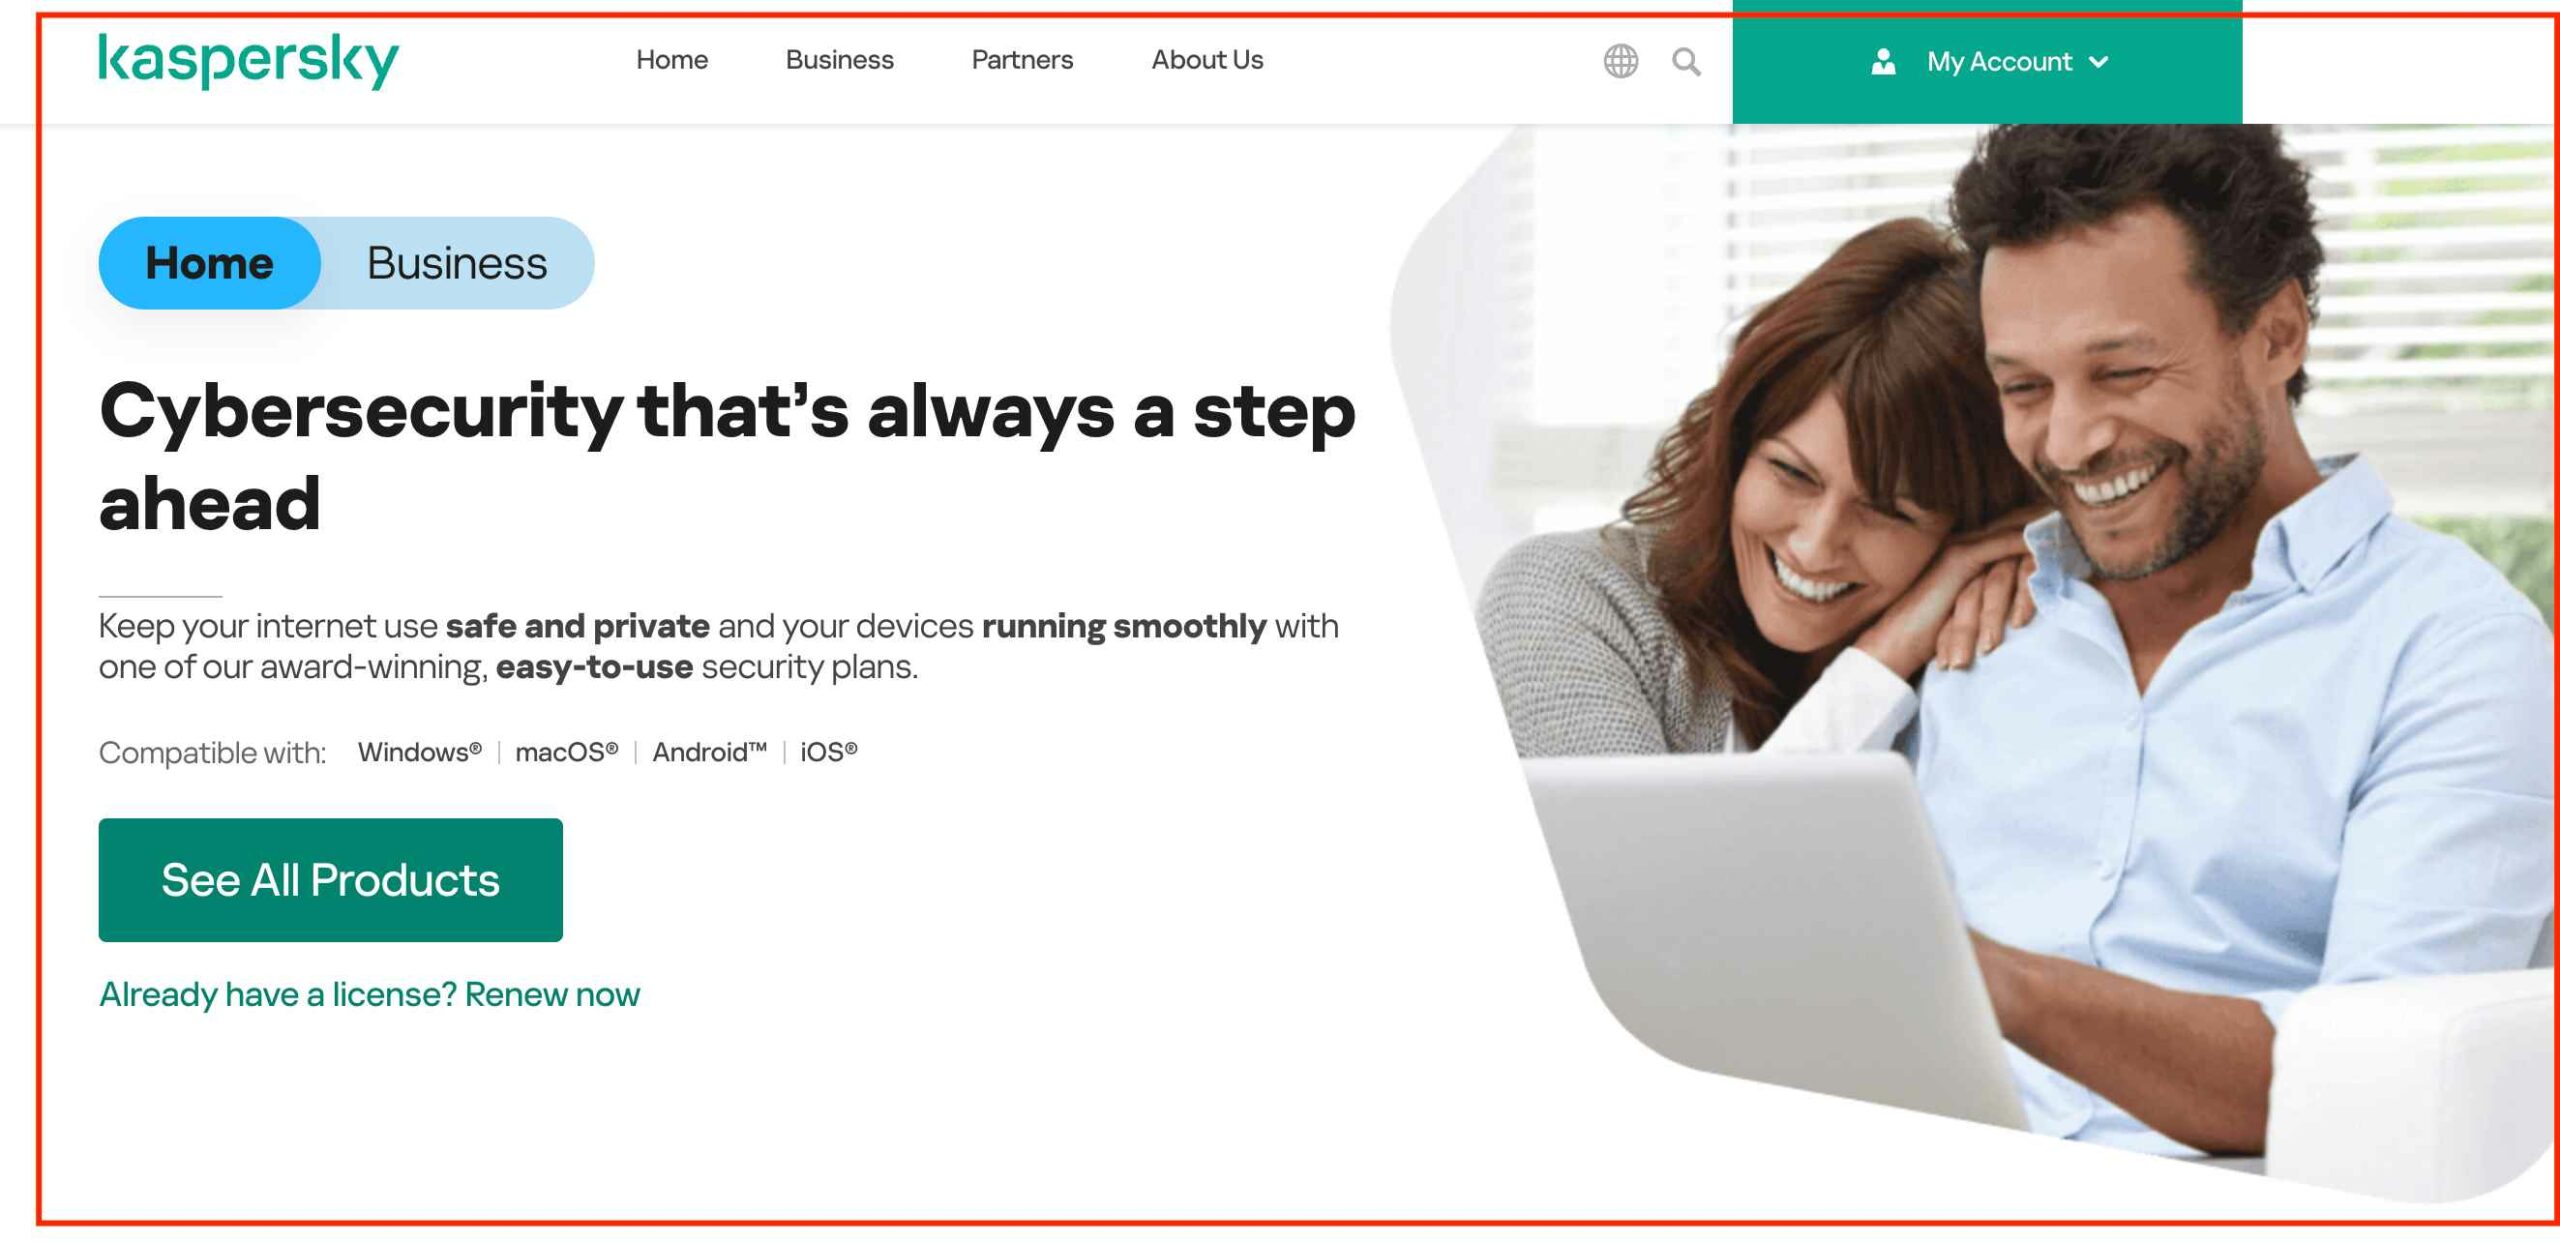 Go To The Official Website Of Kaspersky